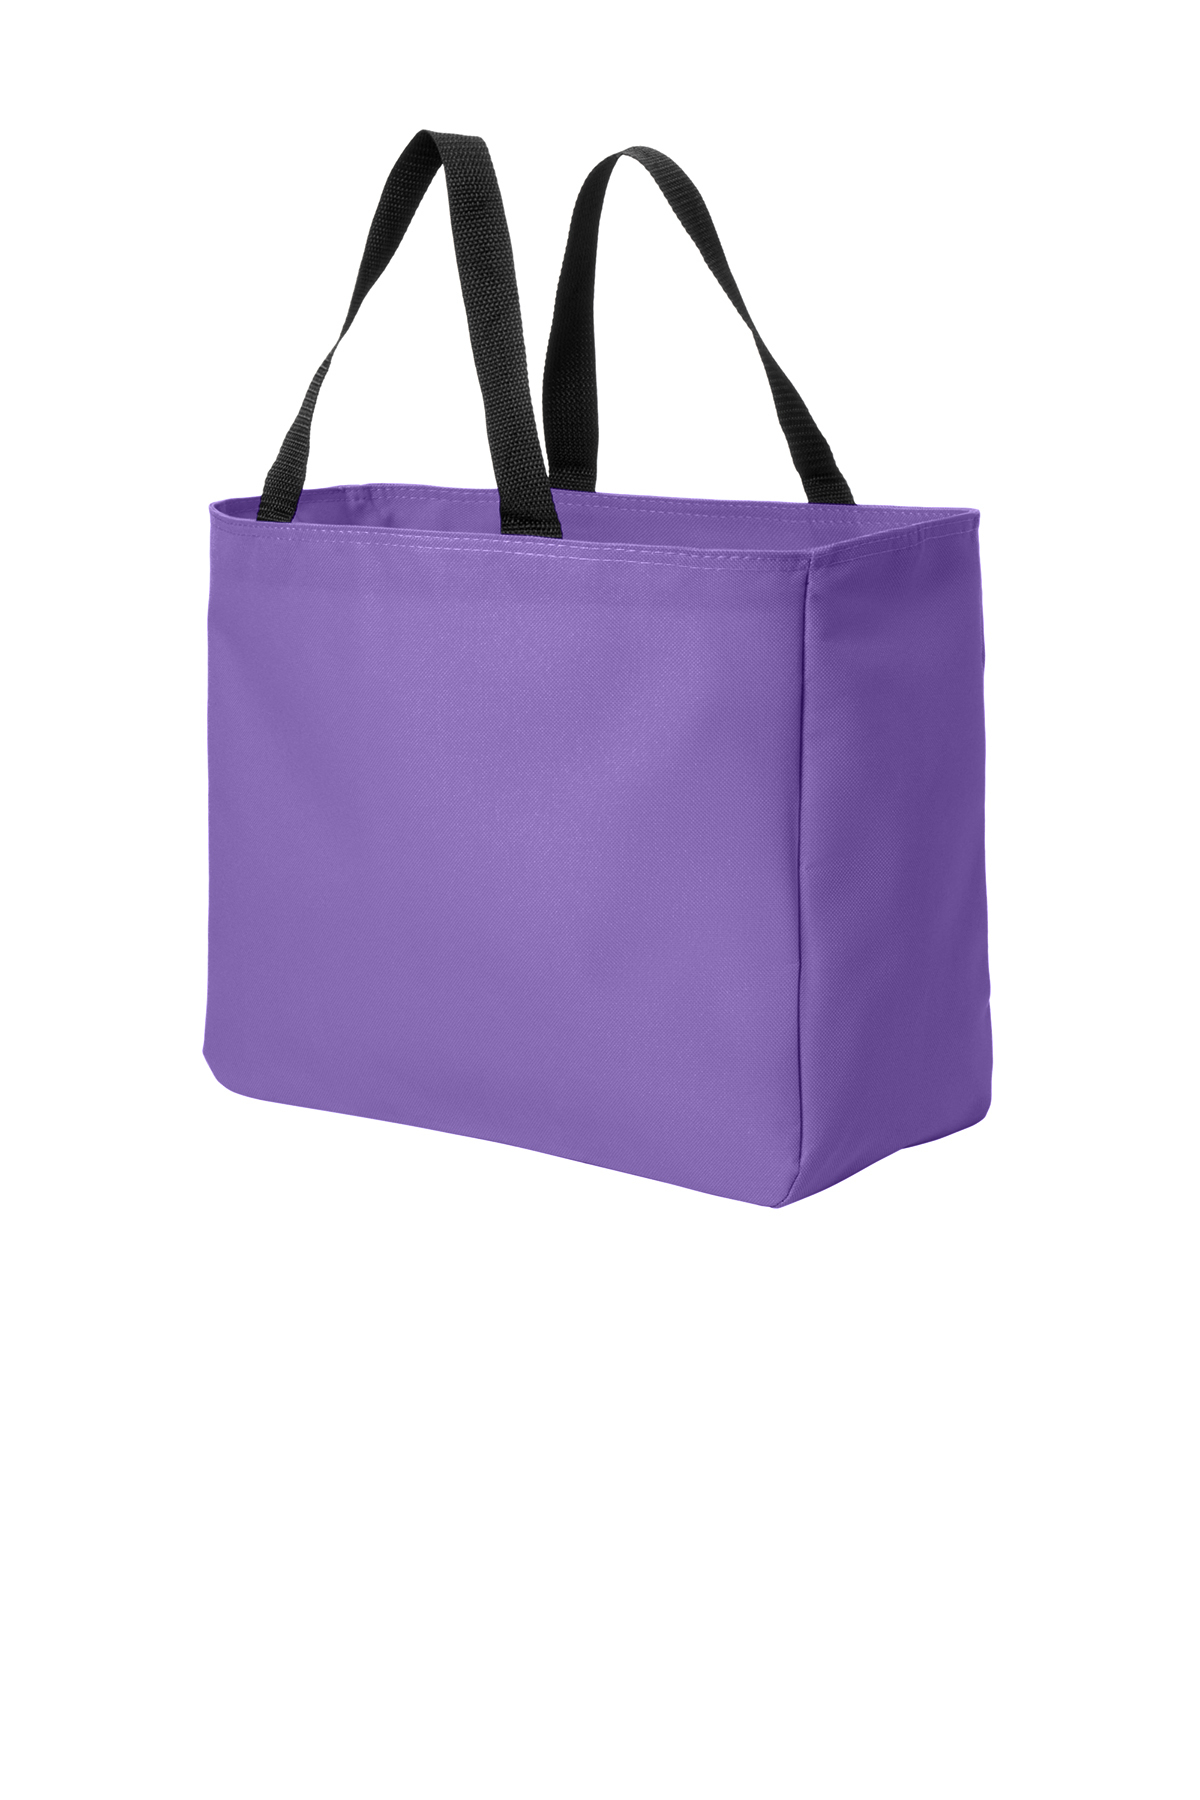 Port Authority - Essential Tote | Product | SanMar